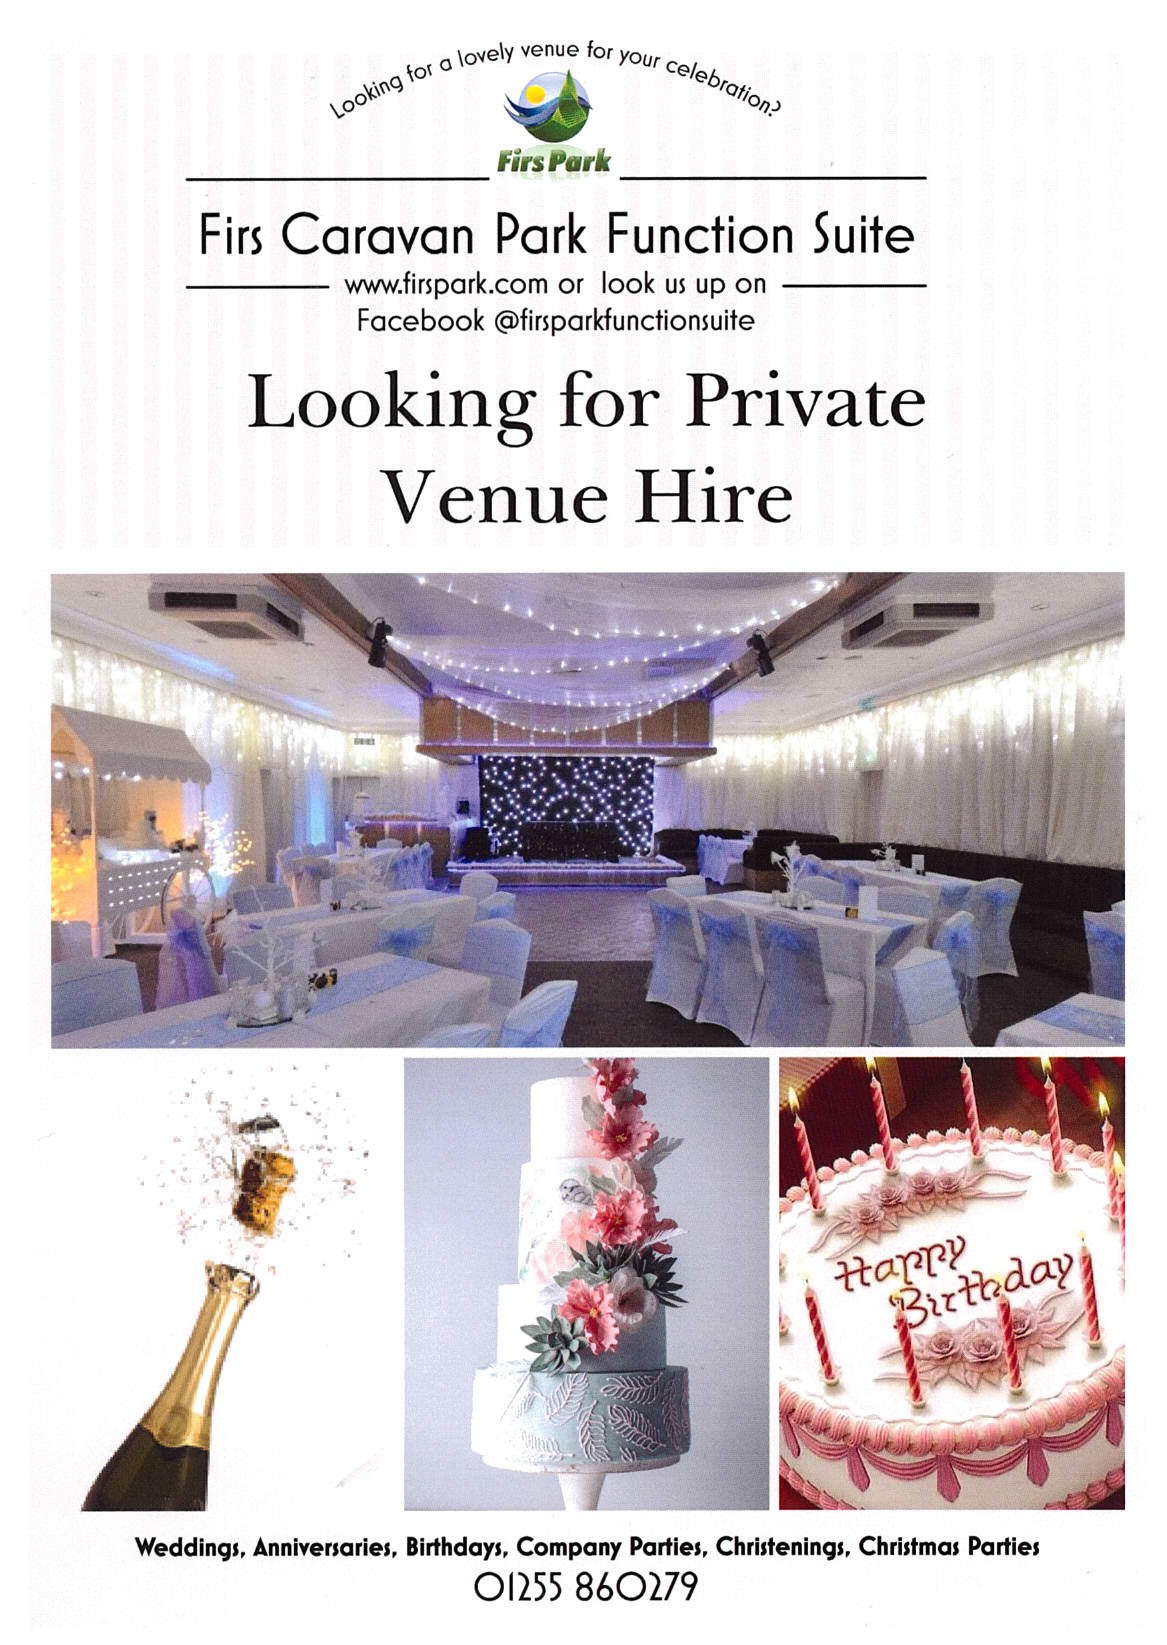 Function Suite Makeovers